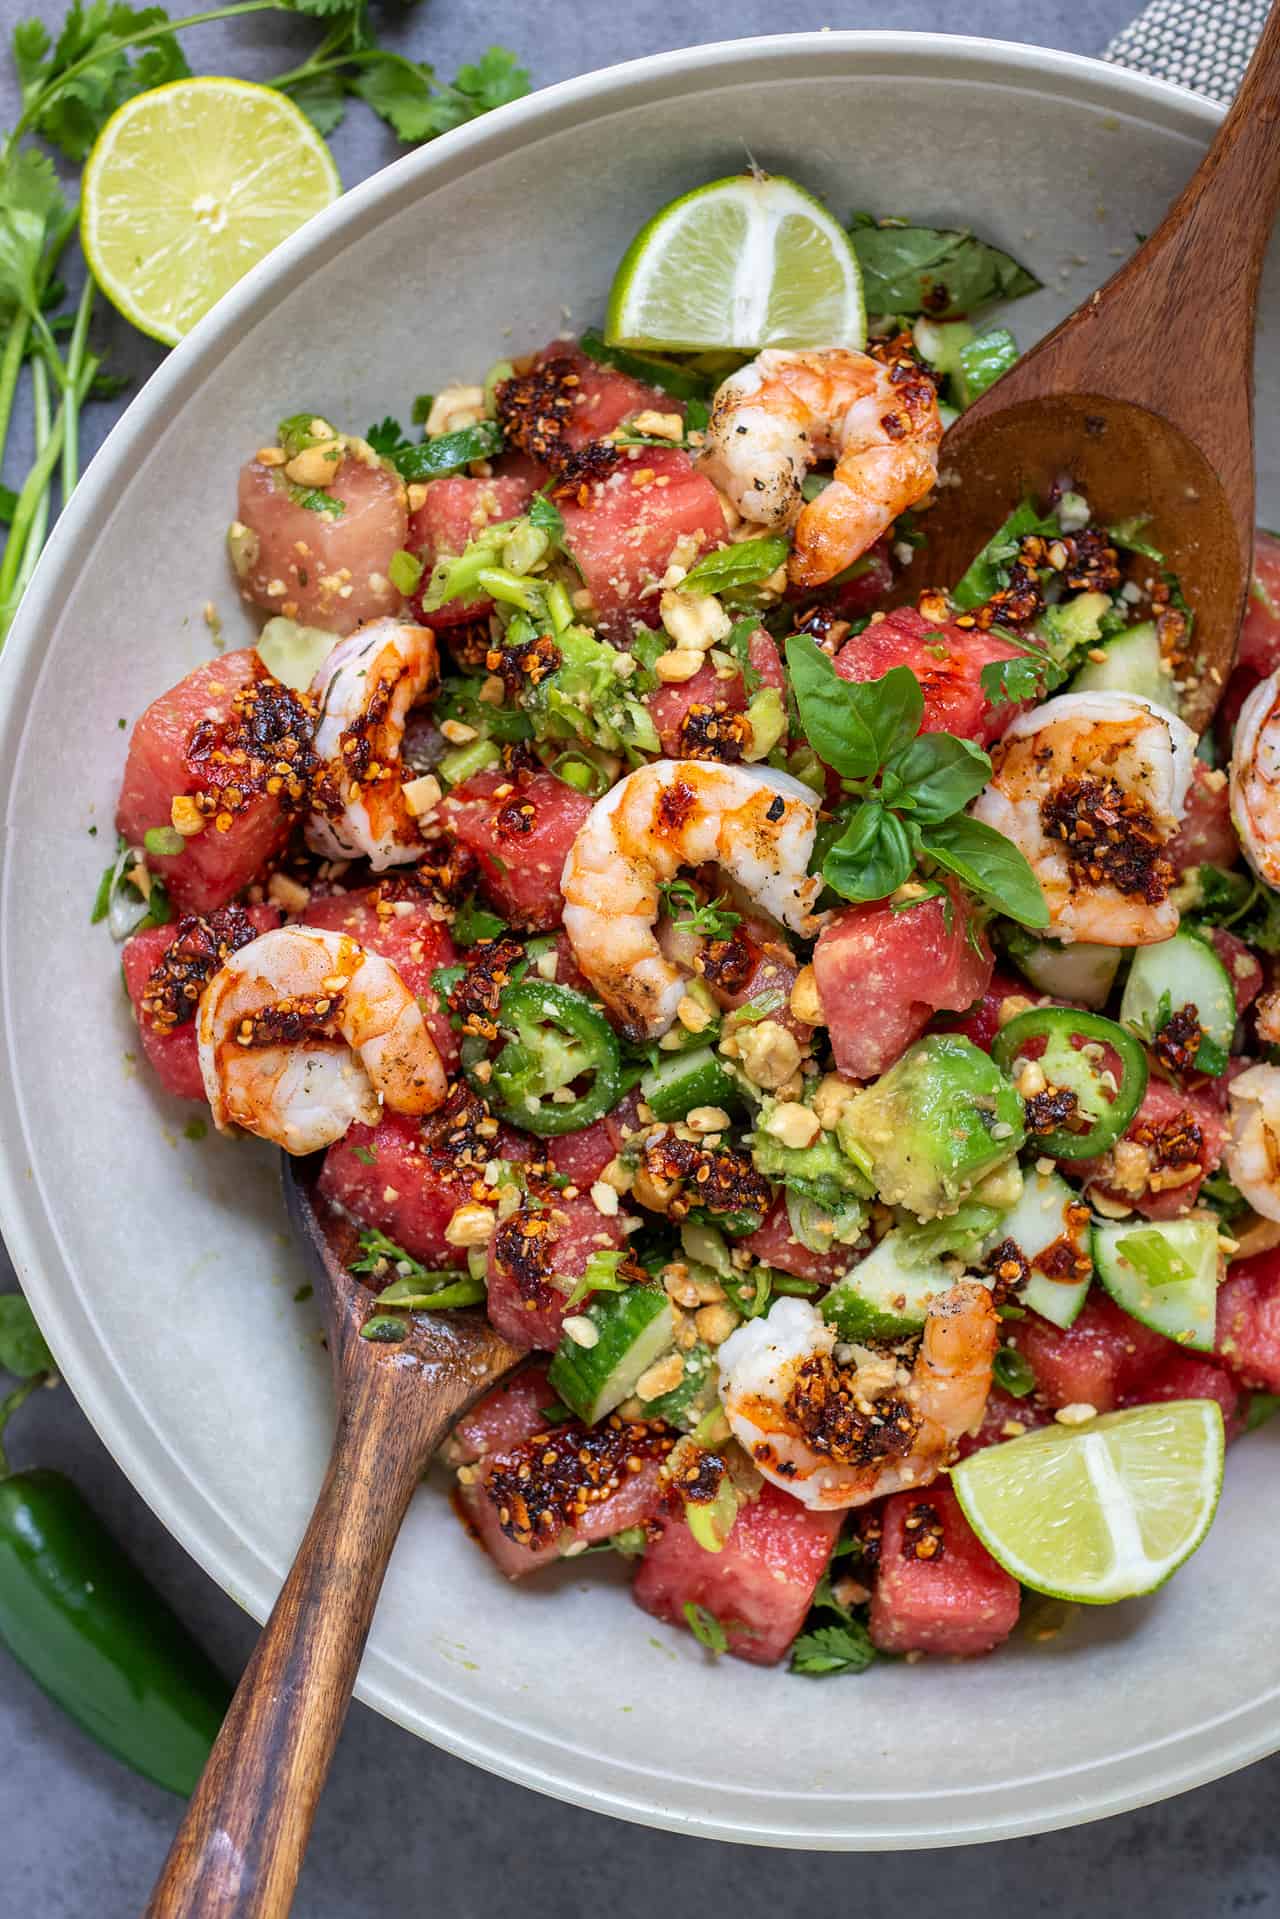 A large round salad bowl filled with spicy watermelon salad topped with grilled shrimp. There's a fresh sprig of mint in the middle and the salad is drizzled with chili crunch oil. You can see the diced cucumbers and avocado. Two serving spoons are in the salad bowl.